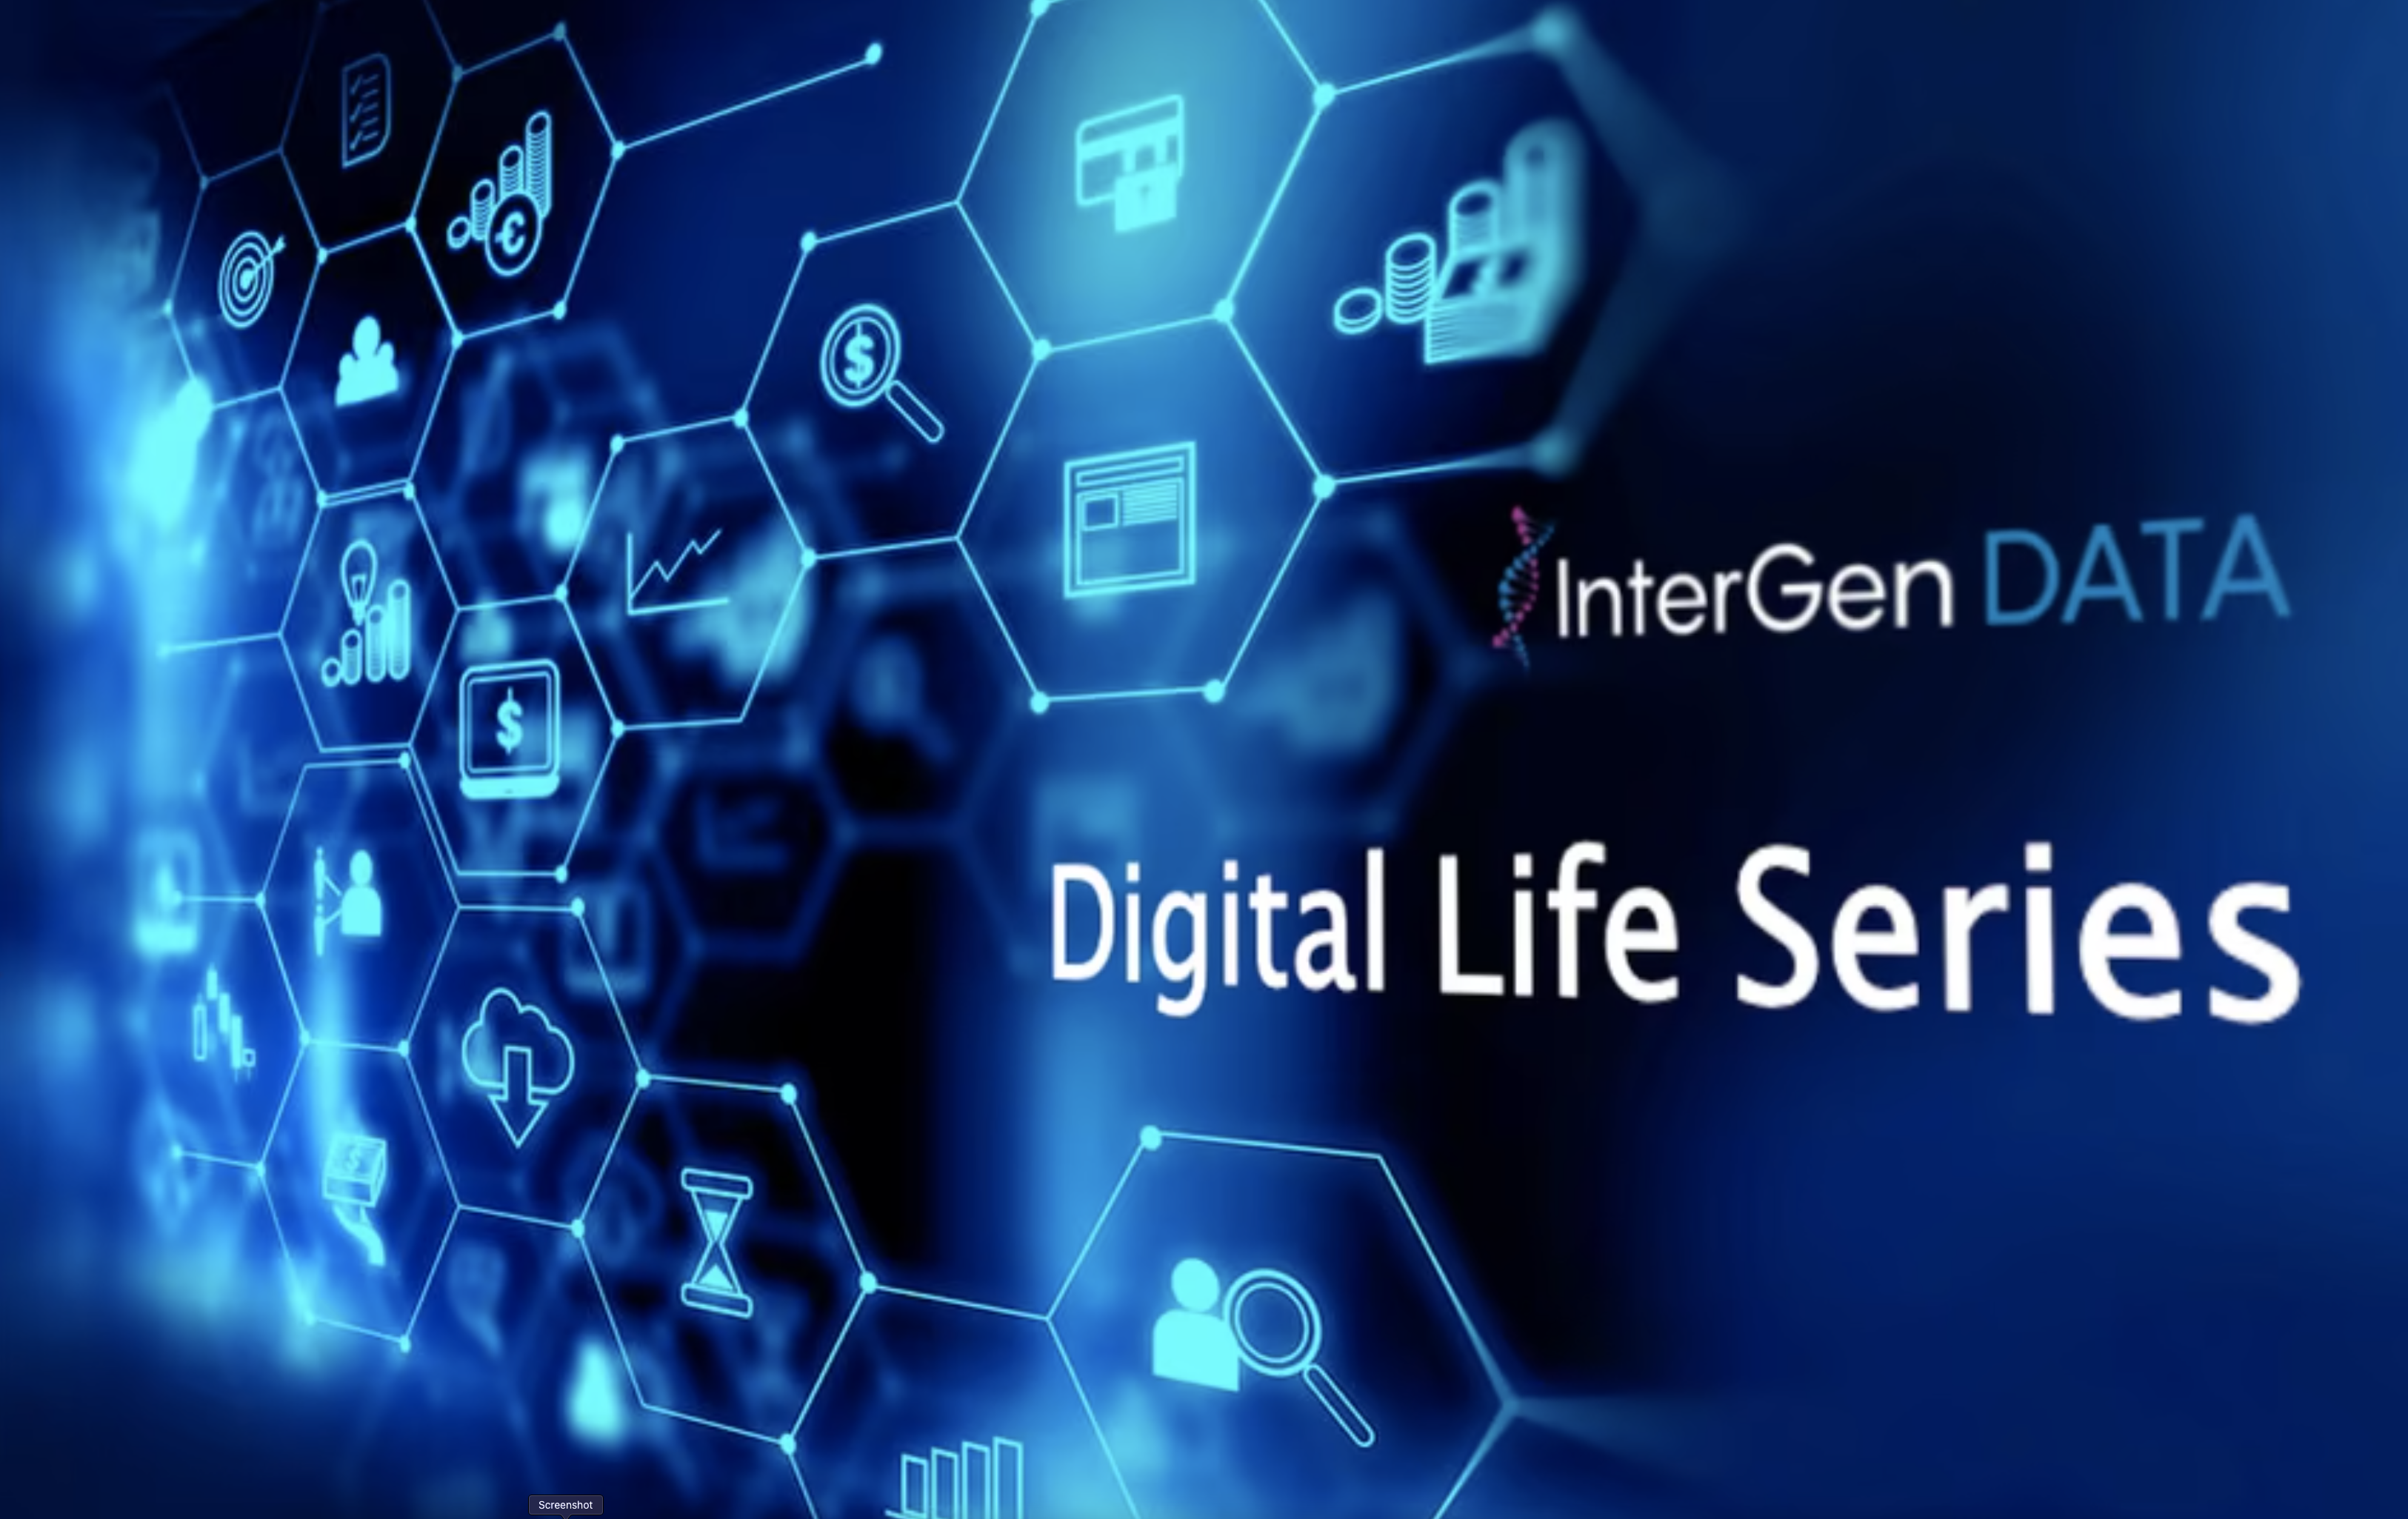 Welcome to the Digital Life Series